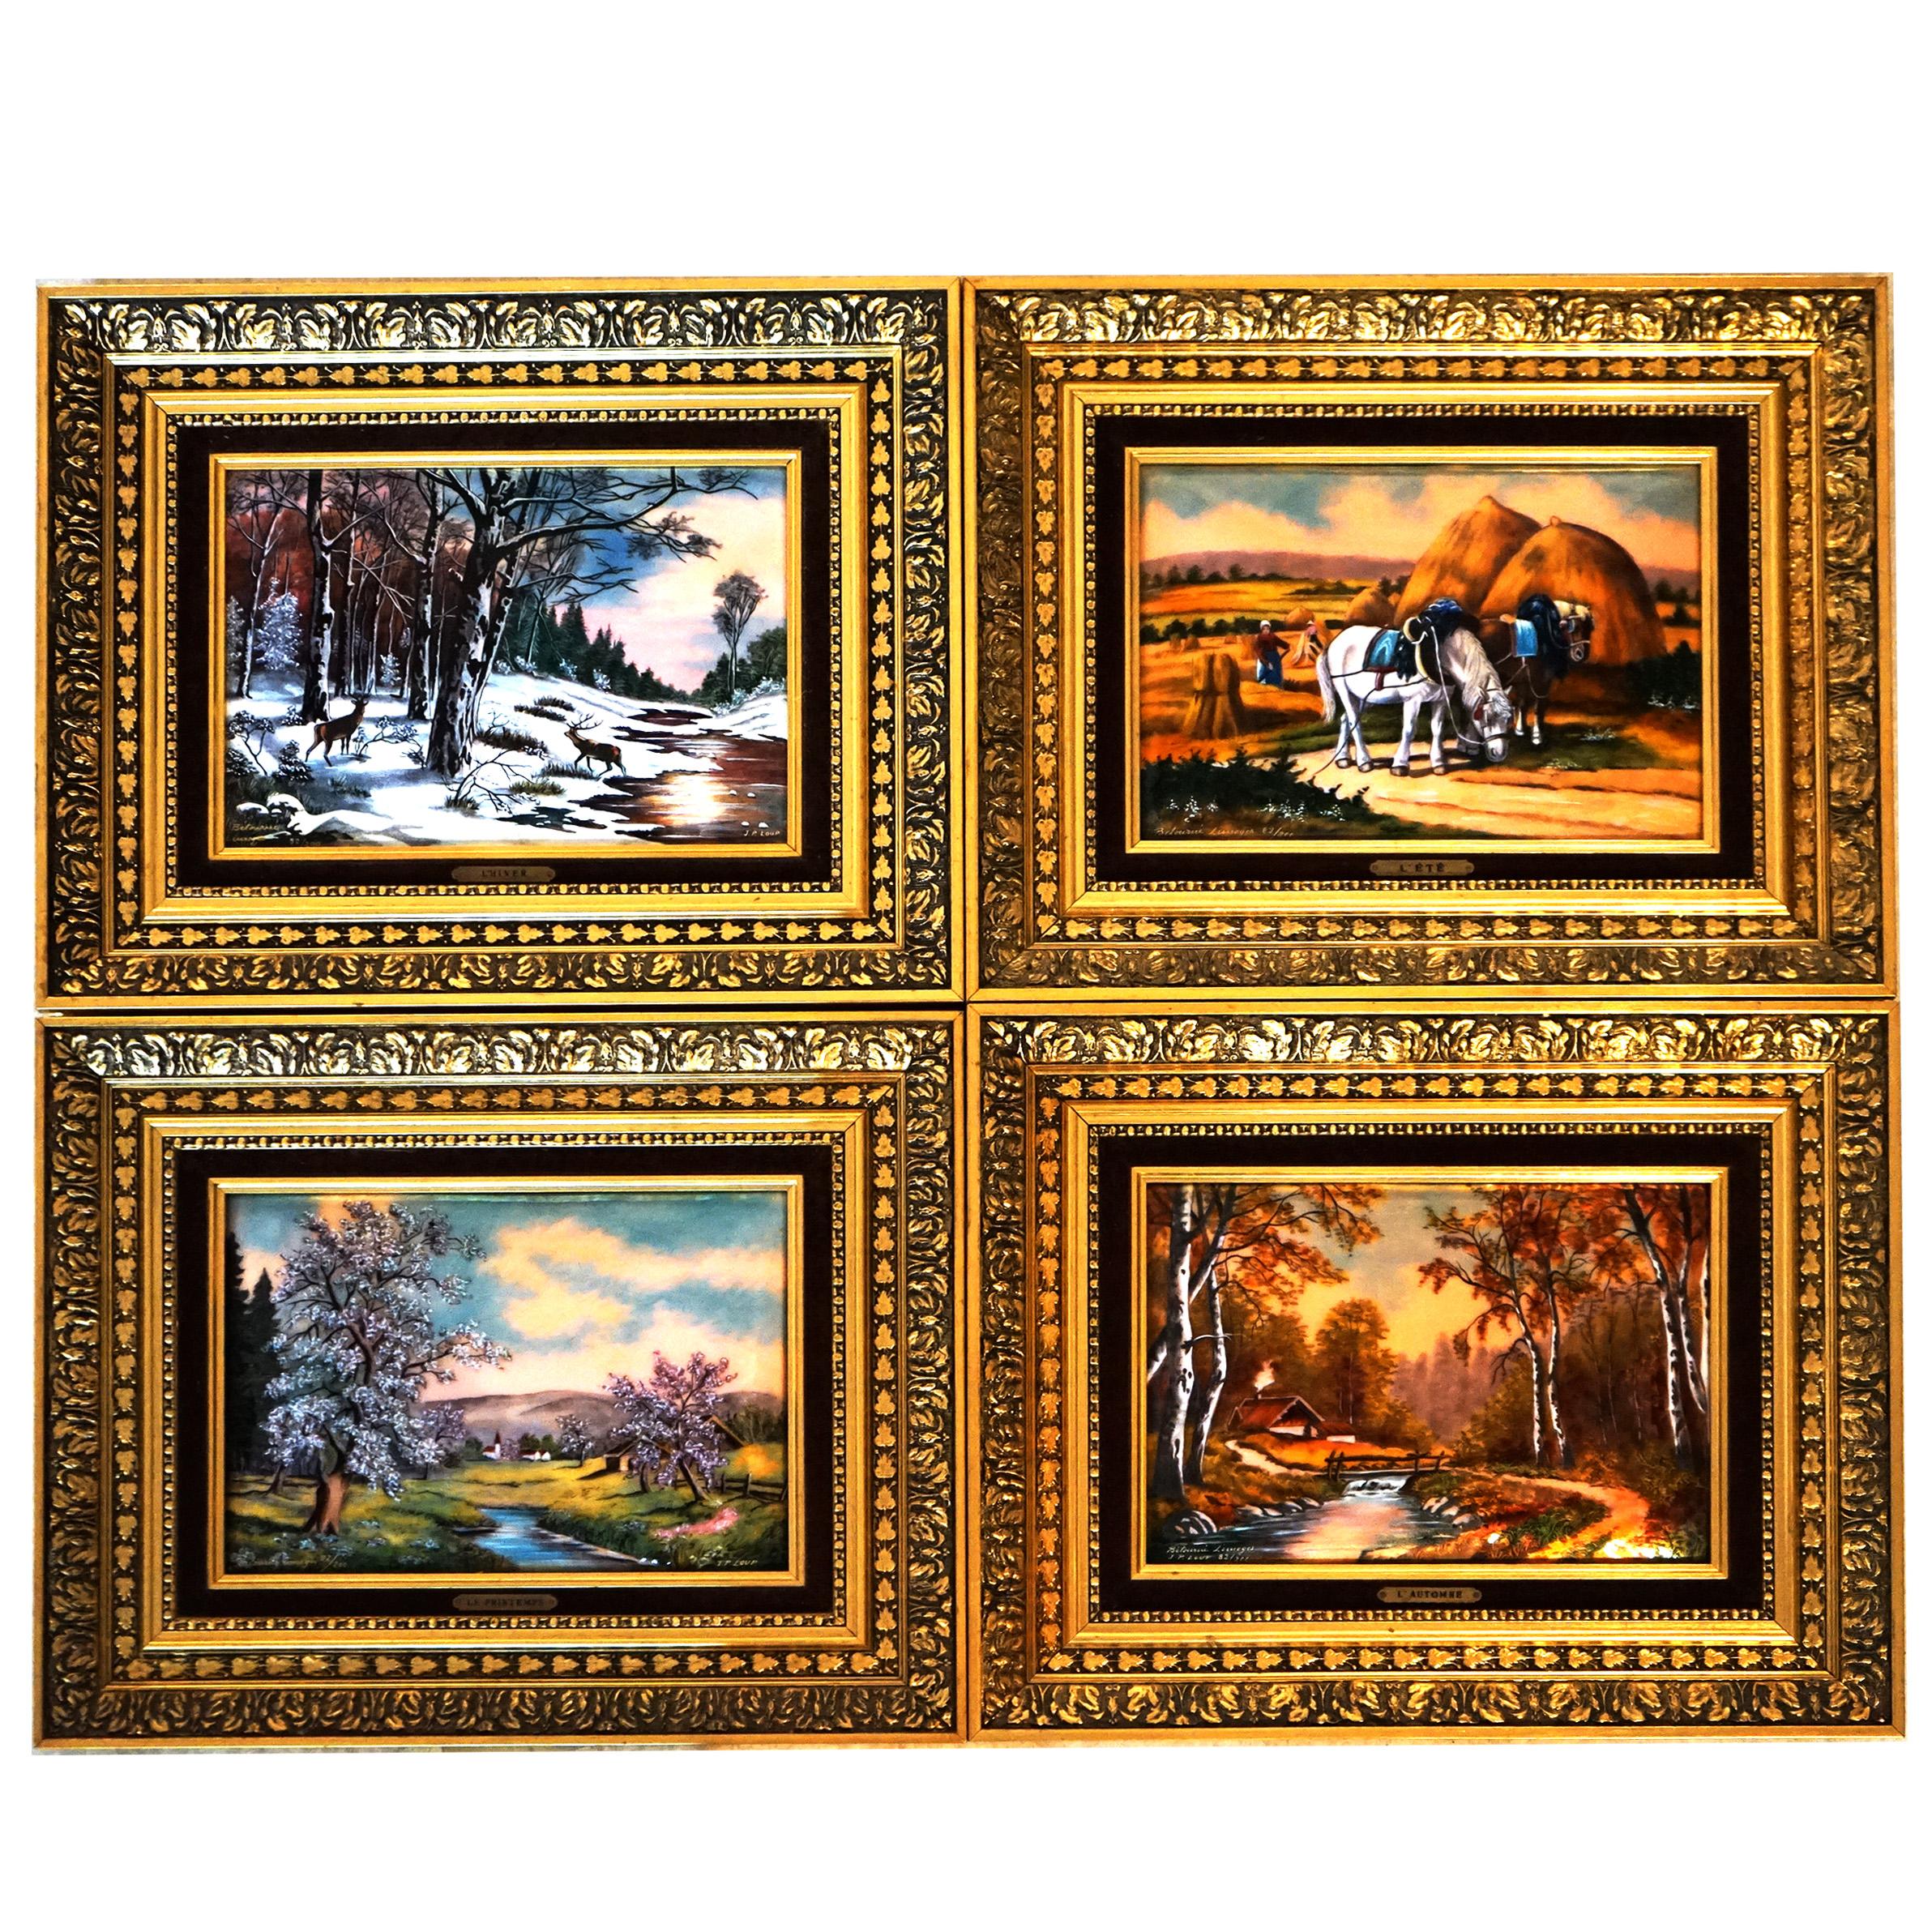 A set of four Atelier Betourne Limoges porcelain plaque landscape paintings titled “The Four Seasons”, signed and framed, 20thC

Measure - overall 14.5